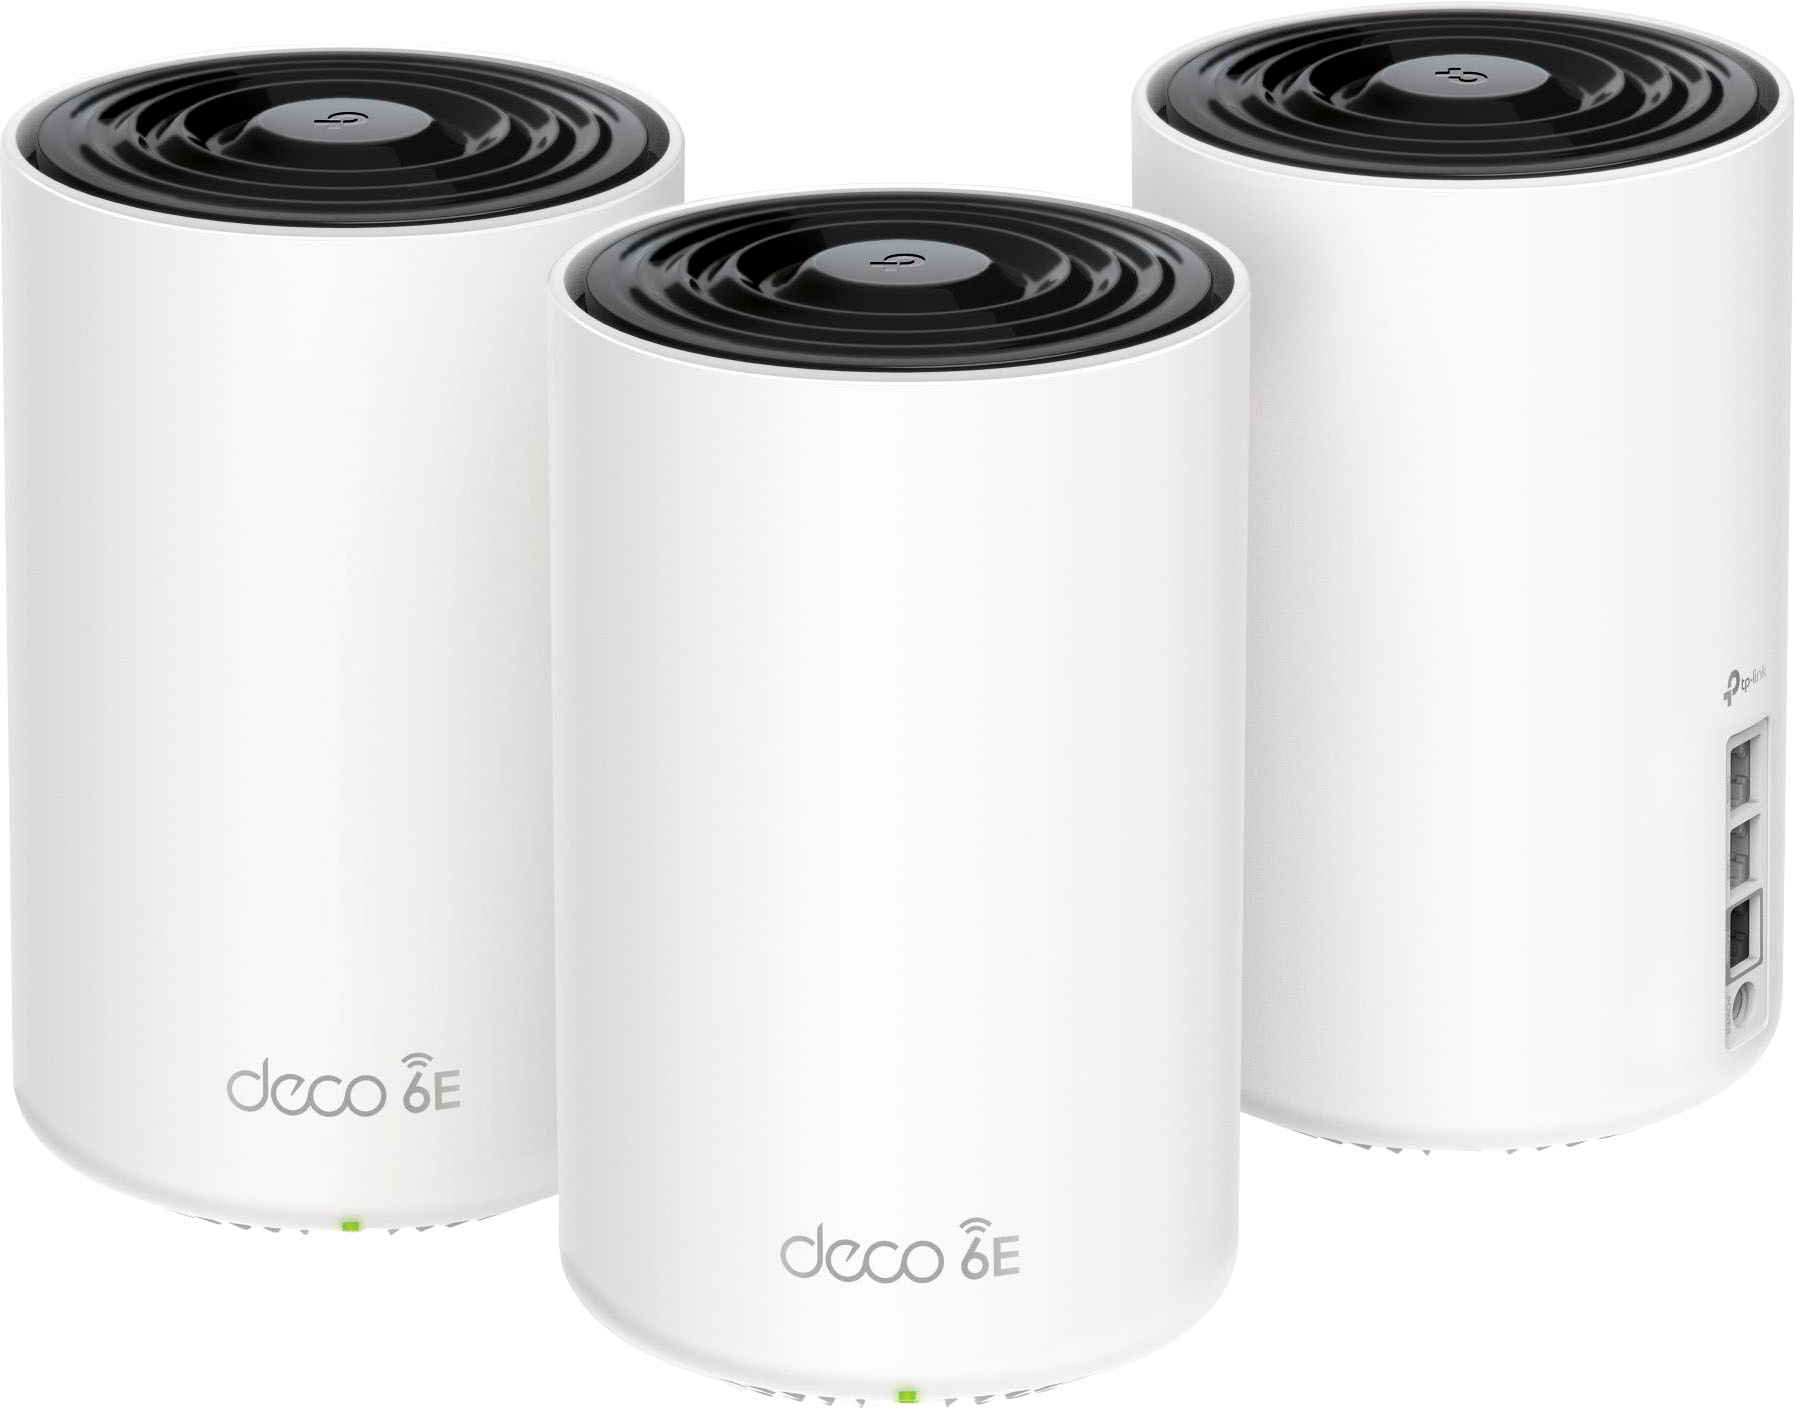 TP-Link Deco X20 Mesh Mesh Wi-Fi 6 System with a Networking Pro 400  Platform